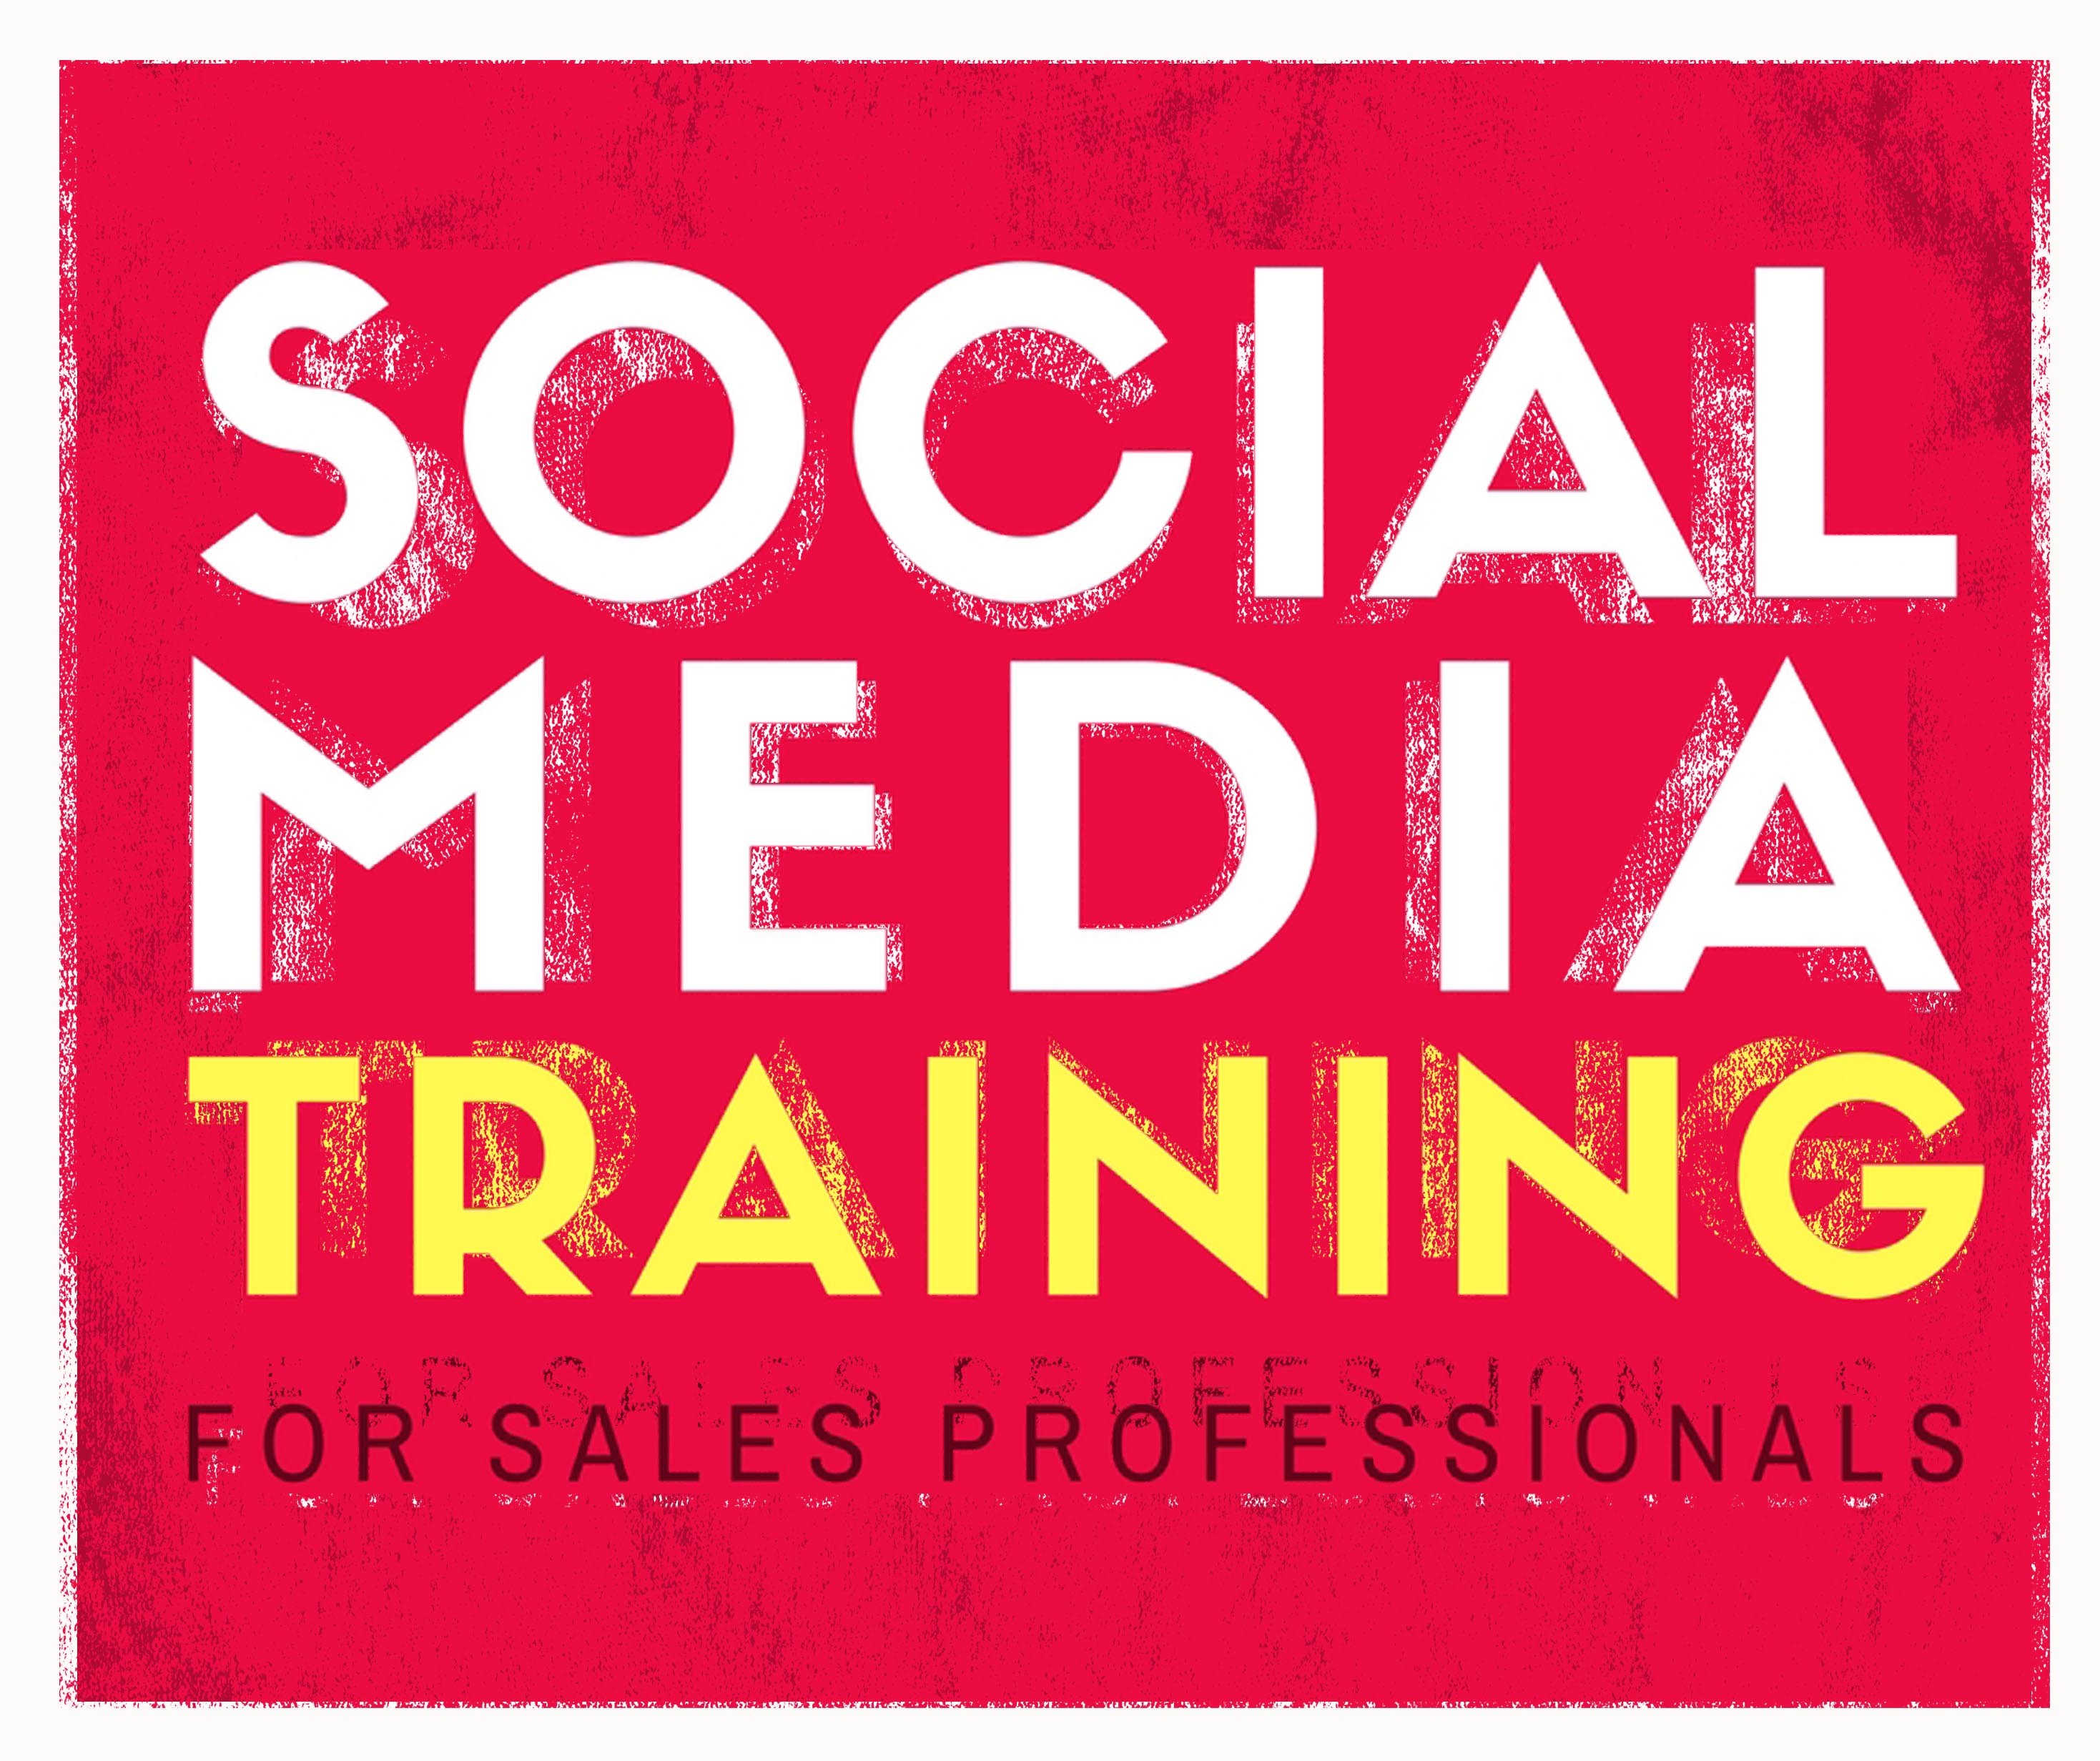 PowerUP Social Media - Social Media For Real Estate - Awesome social media  training and social networking tips for real estate investors, real estate  agents, and other real estate professionals.